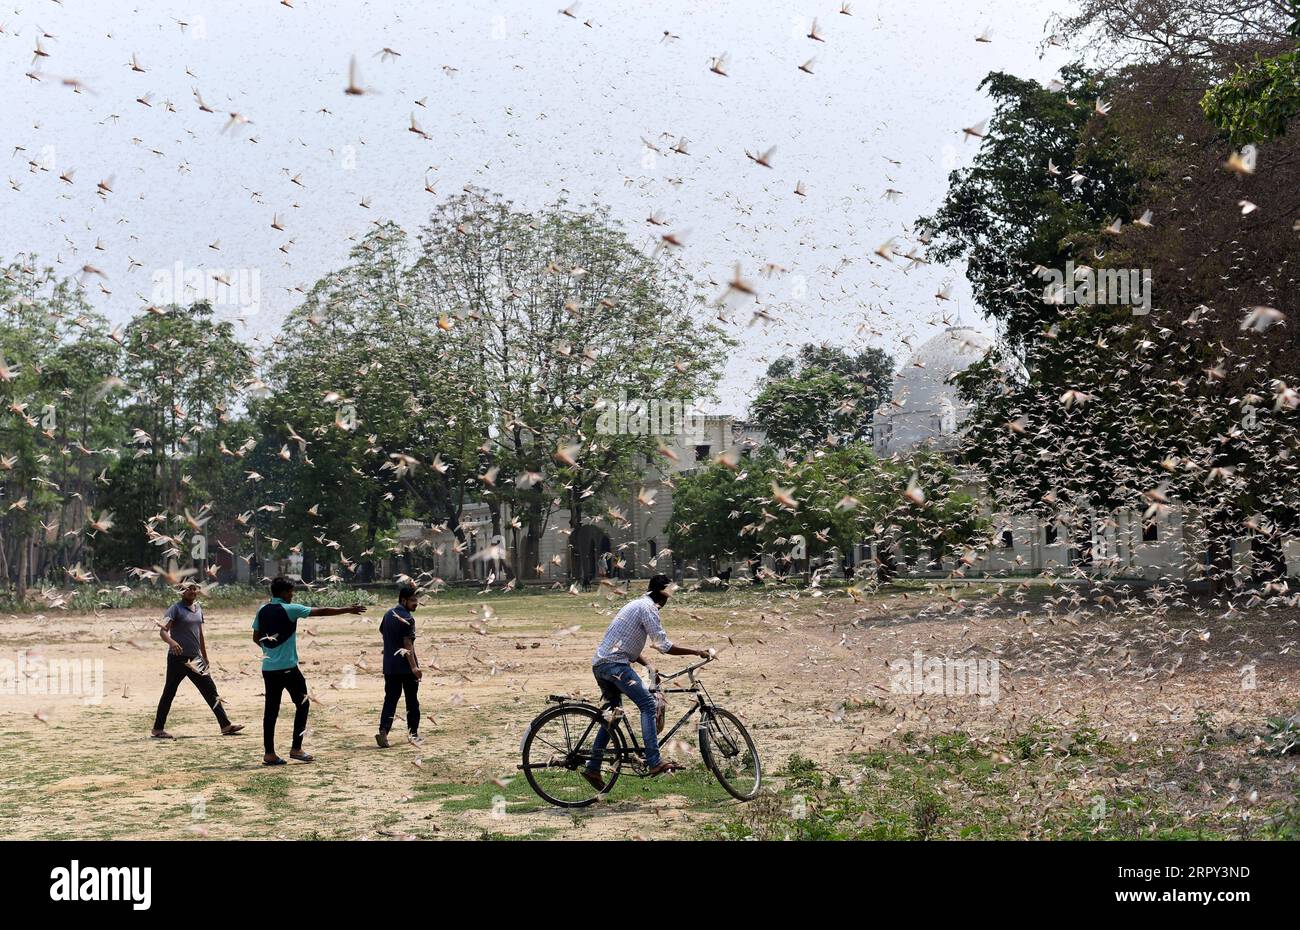 200612 -- PRAYAGRAJ, June 12, 2020 -- Photo taken on June 11, 2020 shows locusts swarming over a field near a residential area in Prayagraj, India s northern state of Uttar Pradesh. Str/Xinhua INDIA-PRAYAGRAJ-LOCUSTS Stringer PUBLICATIONxNOTxINxCHN Stock Photo